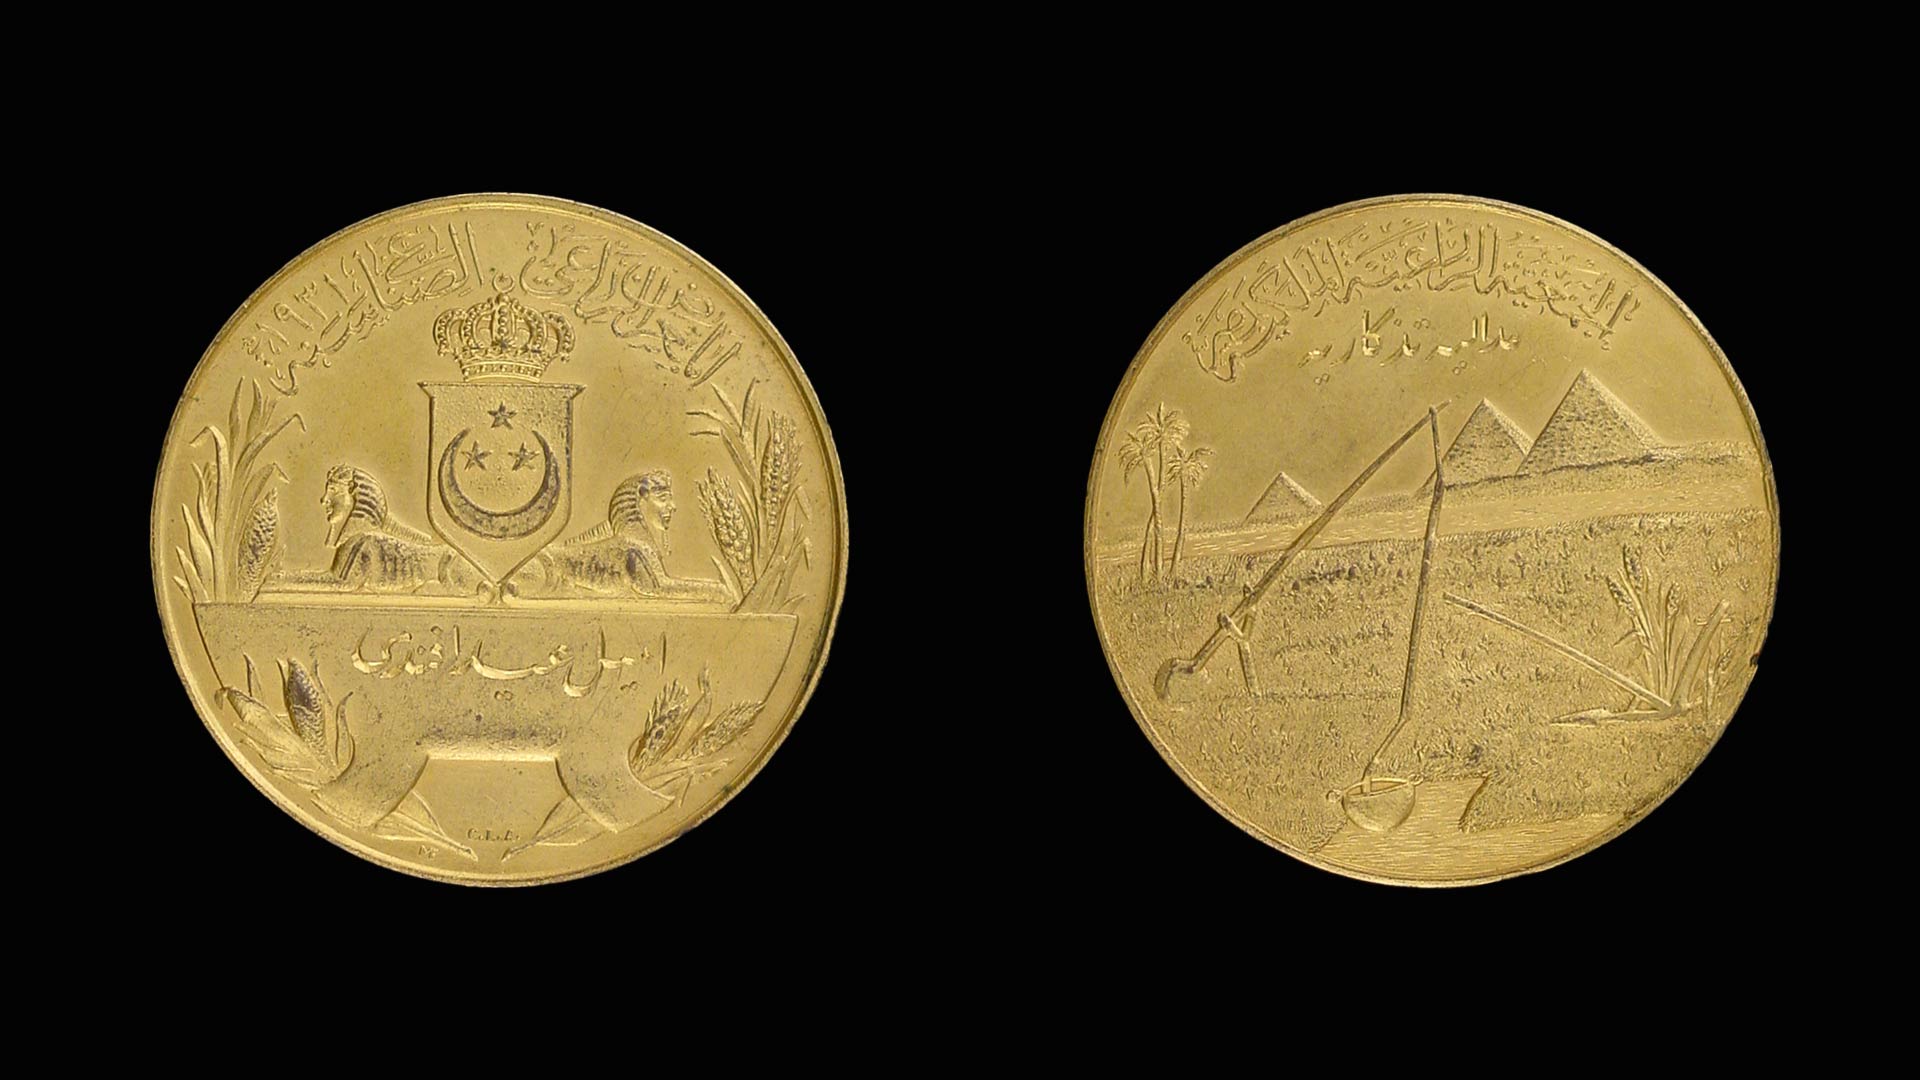 the front and back of a golden medal with engravings on it